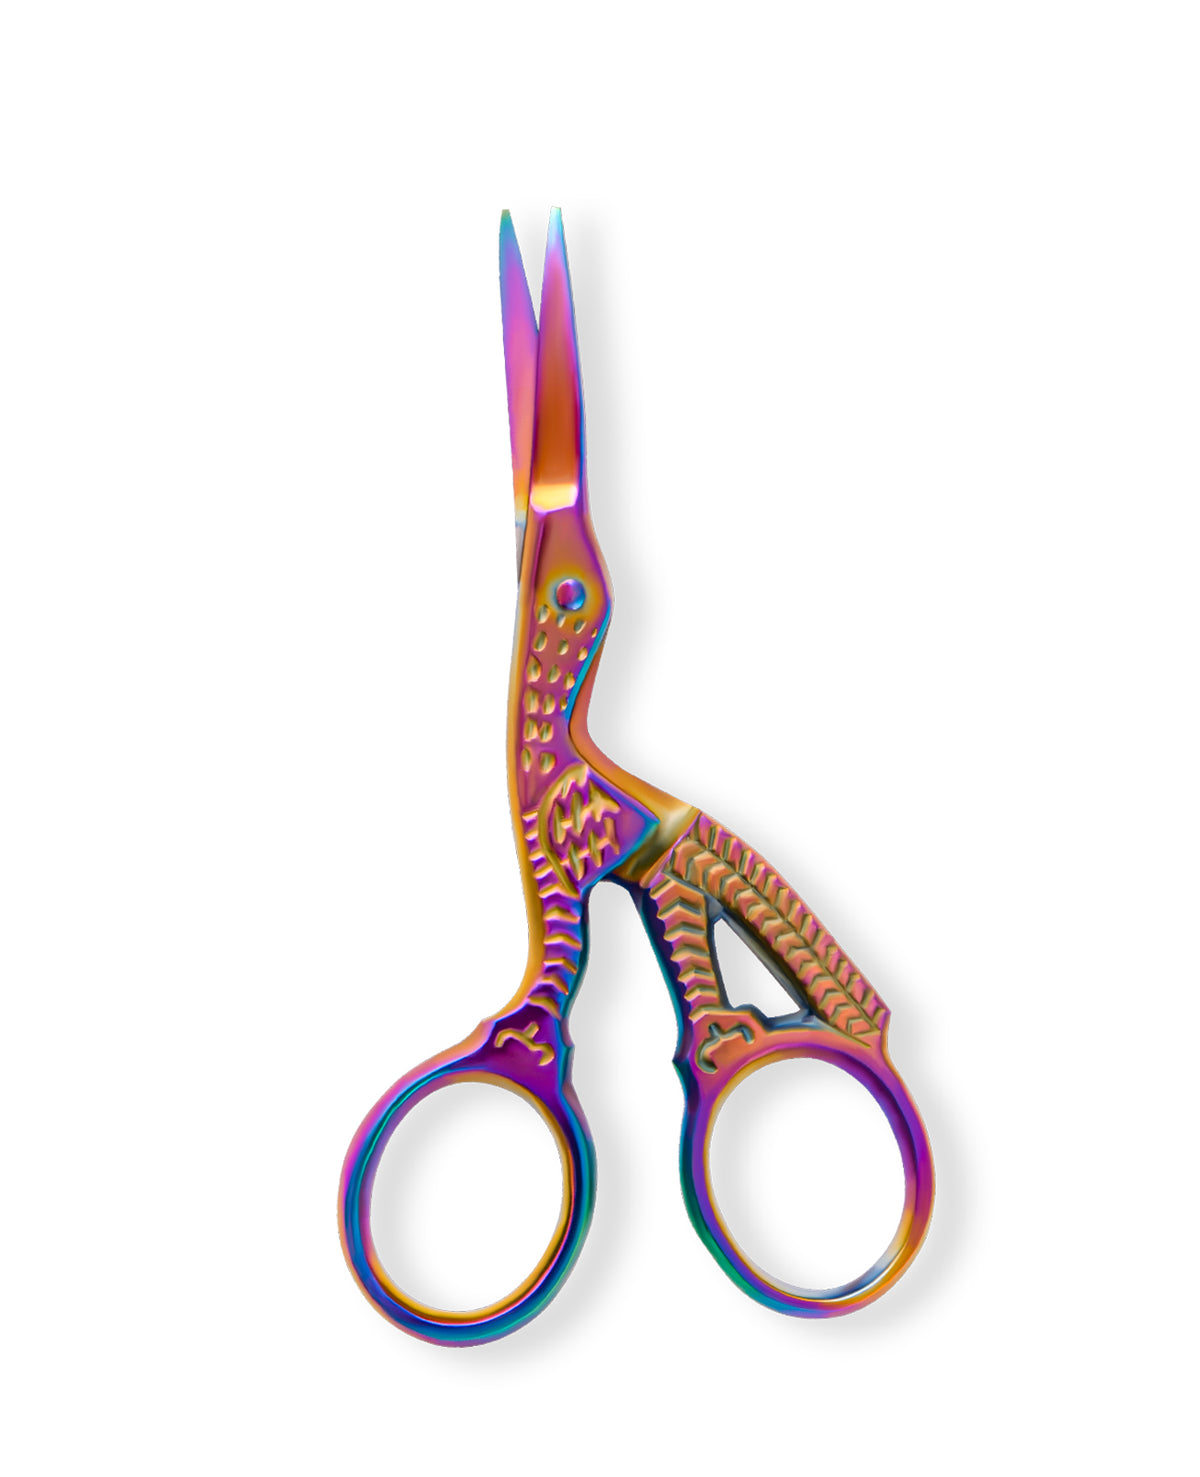 Embroidery Scissors Stainless Steel DIY for Embroidery Craft Needle Work Art Work Vintage